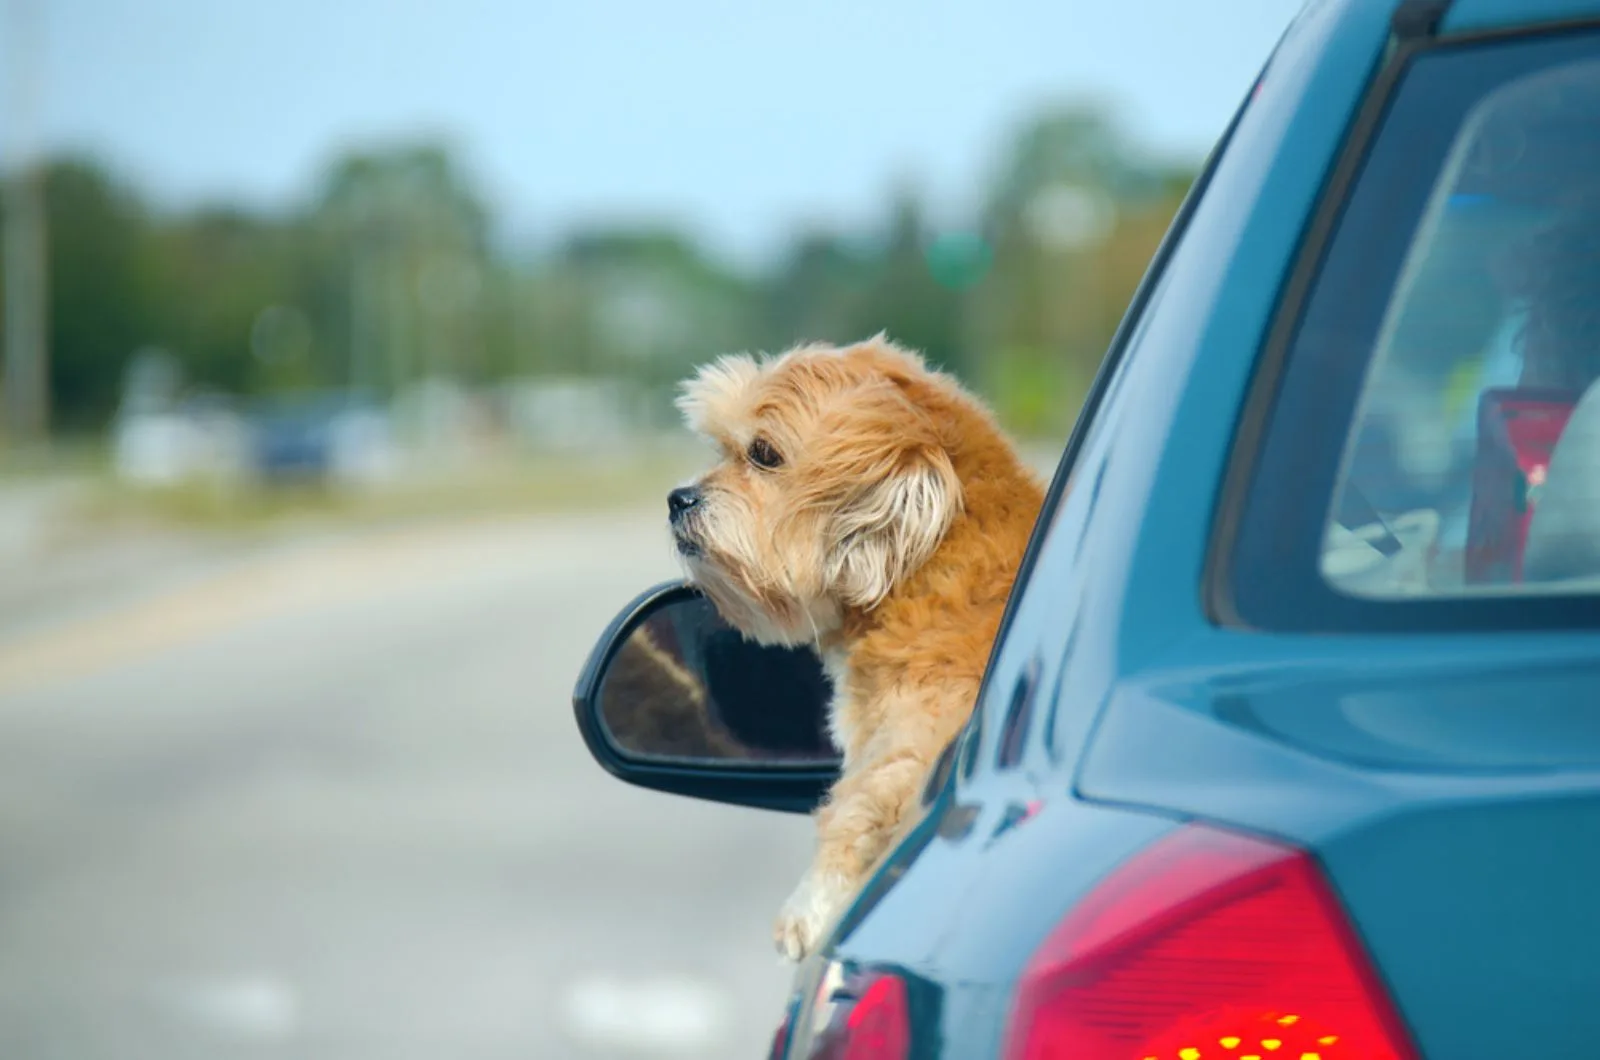 lhasa apso hanging our of a car window  enjoying a ride